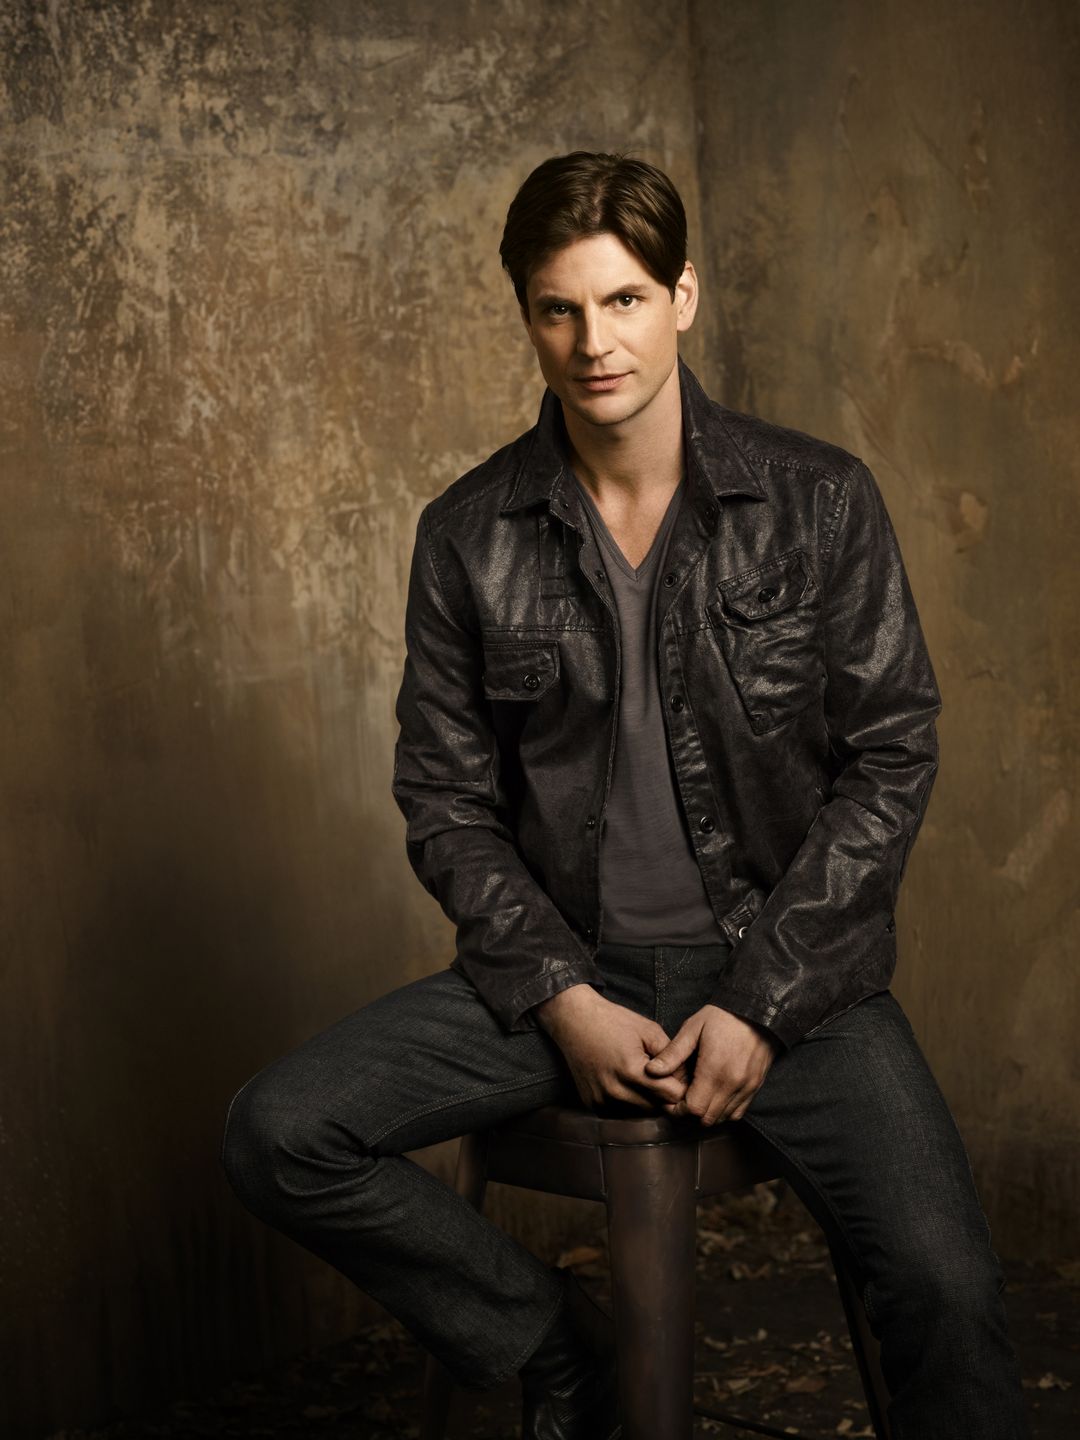 Gale Harold | GALE DEVOTEE- A Gale Harold News Site1080 x 1440